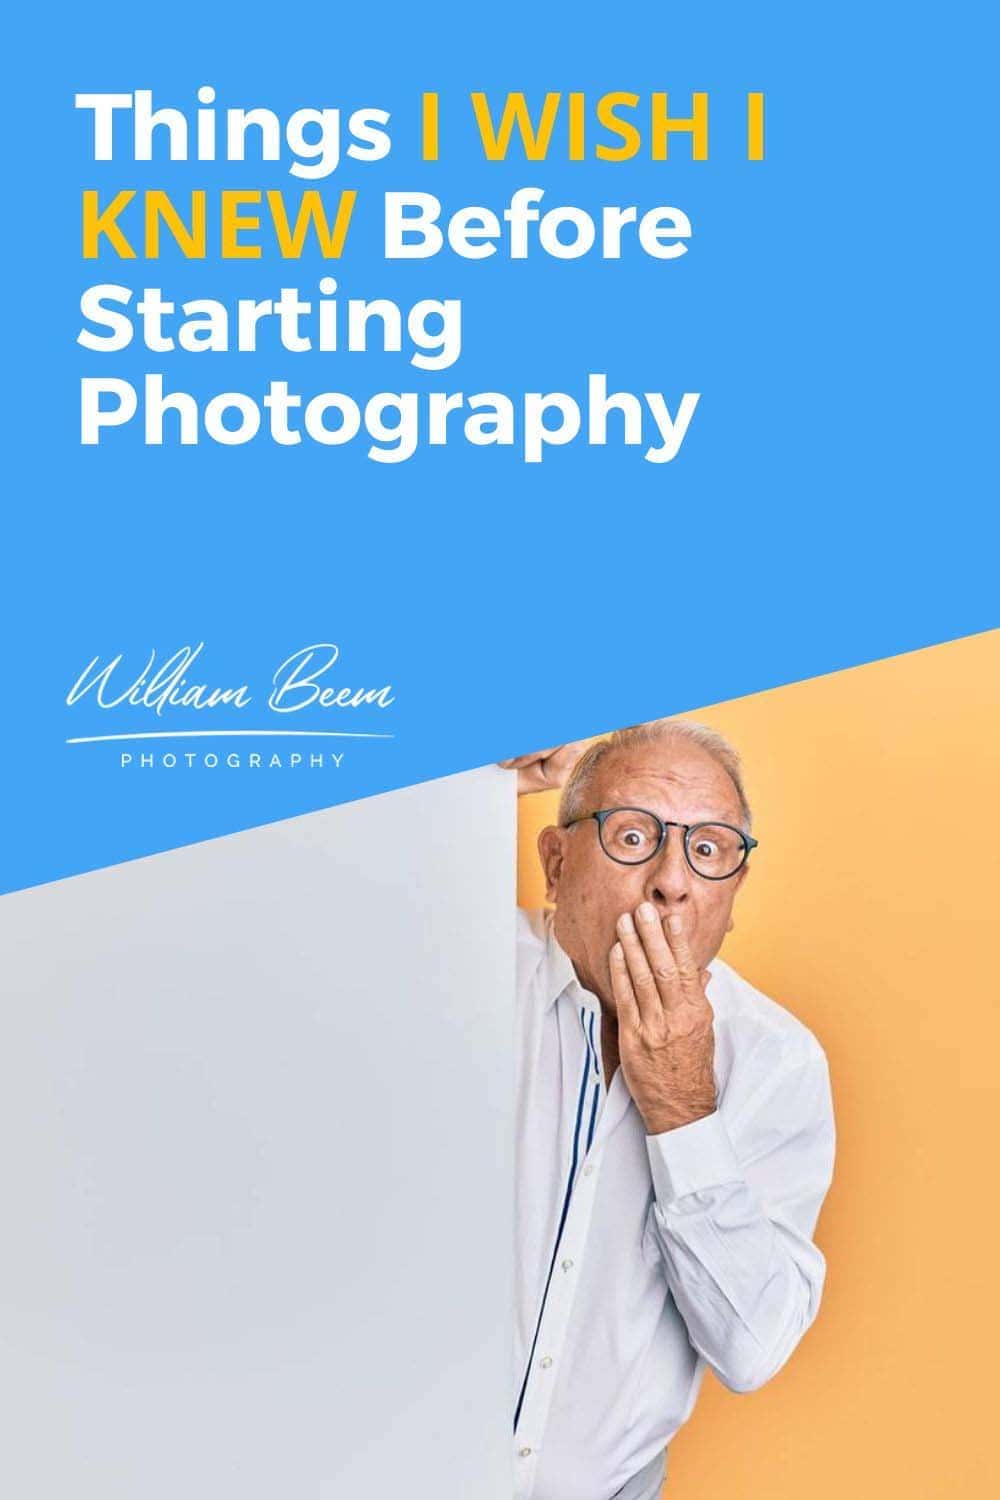 5 Things I Wish I Knew BEFORE Starting Photography